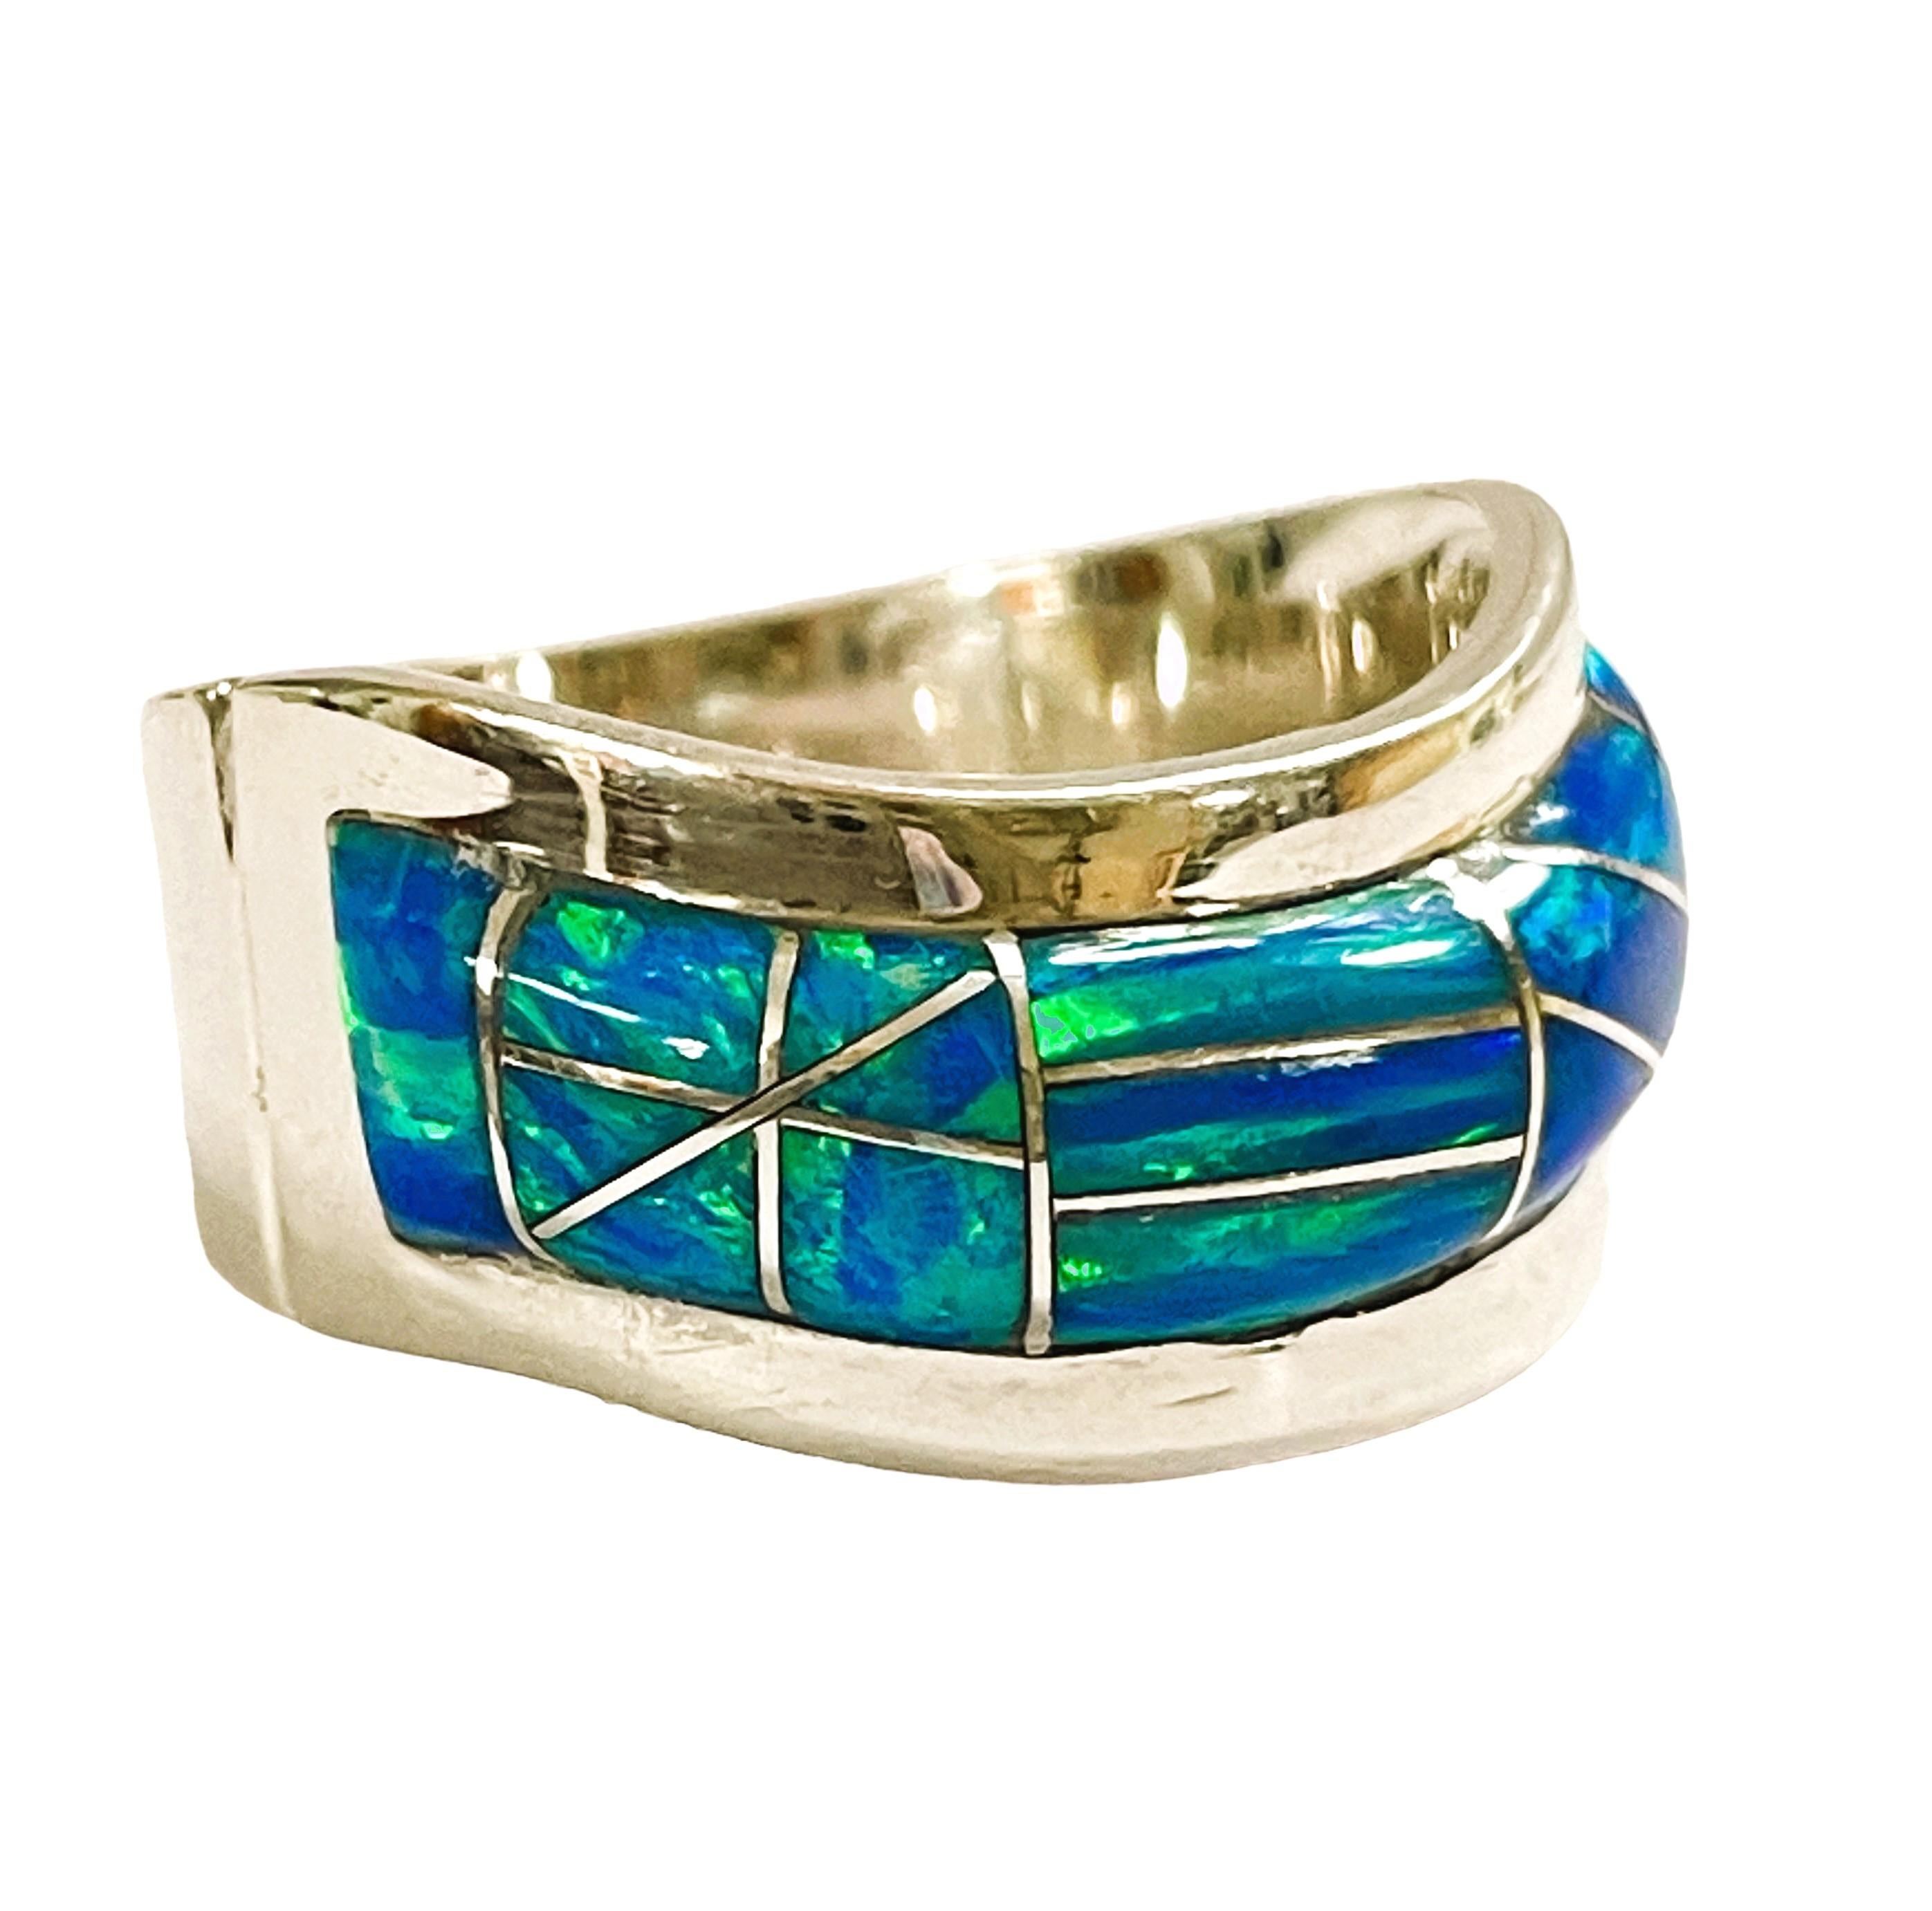 Women's Sterling Silver Inlaid Opal Ring, Stamped by Designer